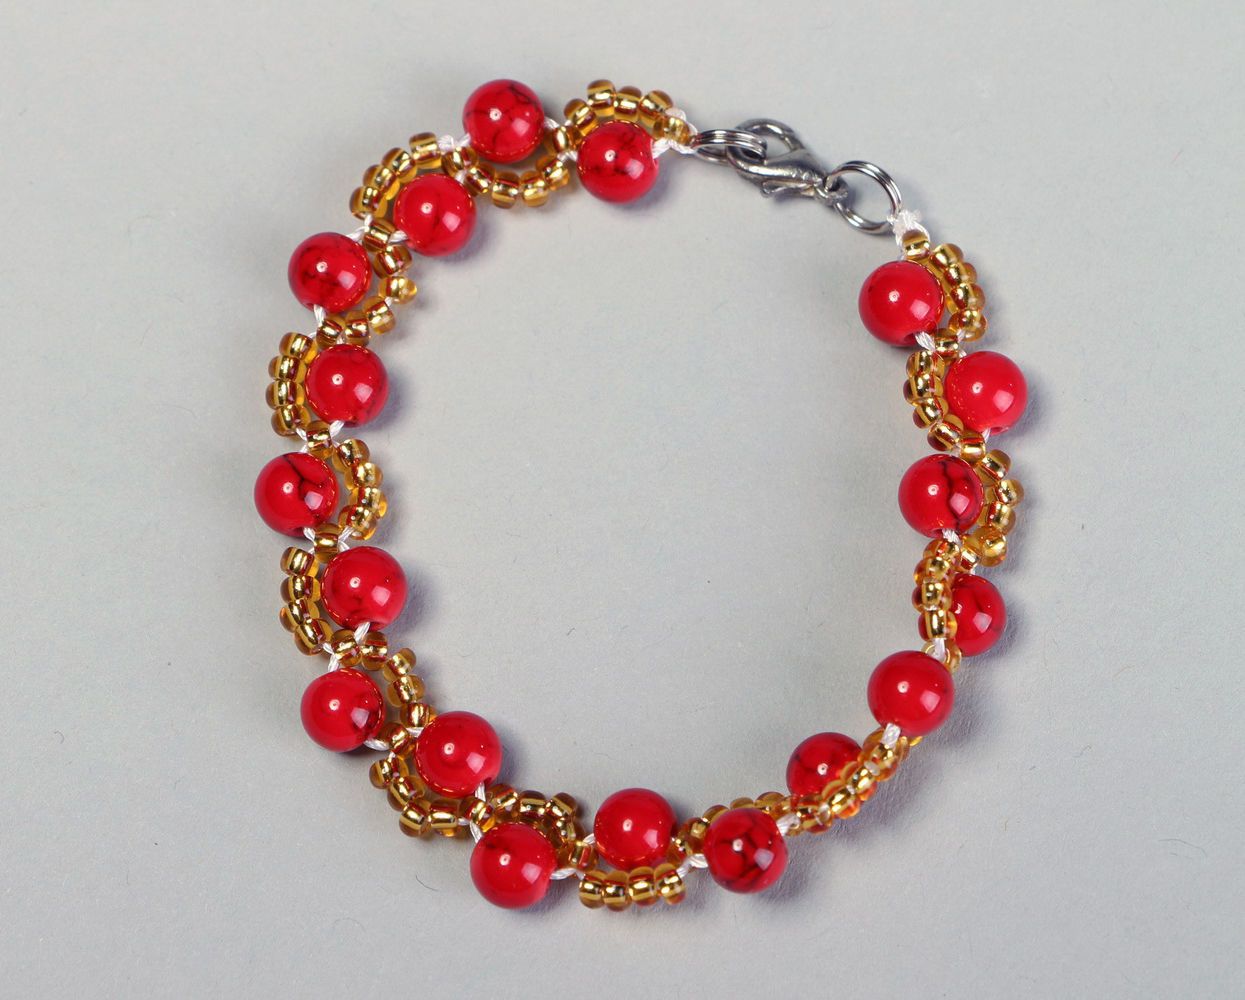 Bracelet made of coral and beads photo 2